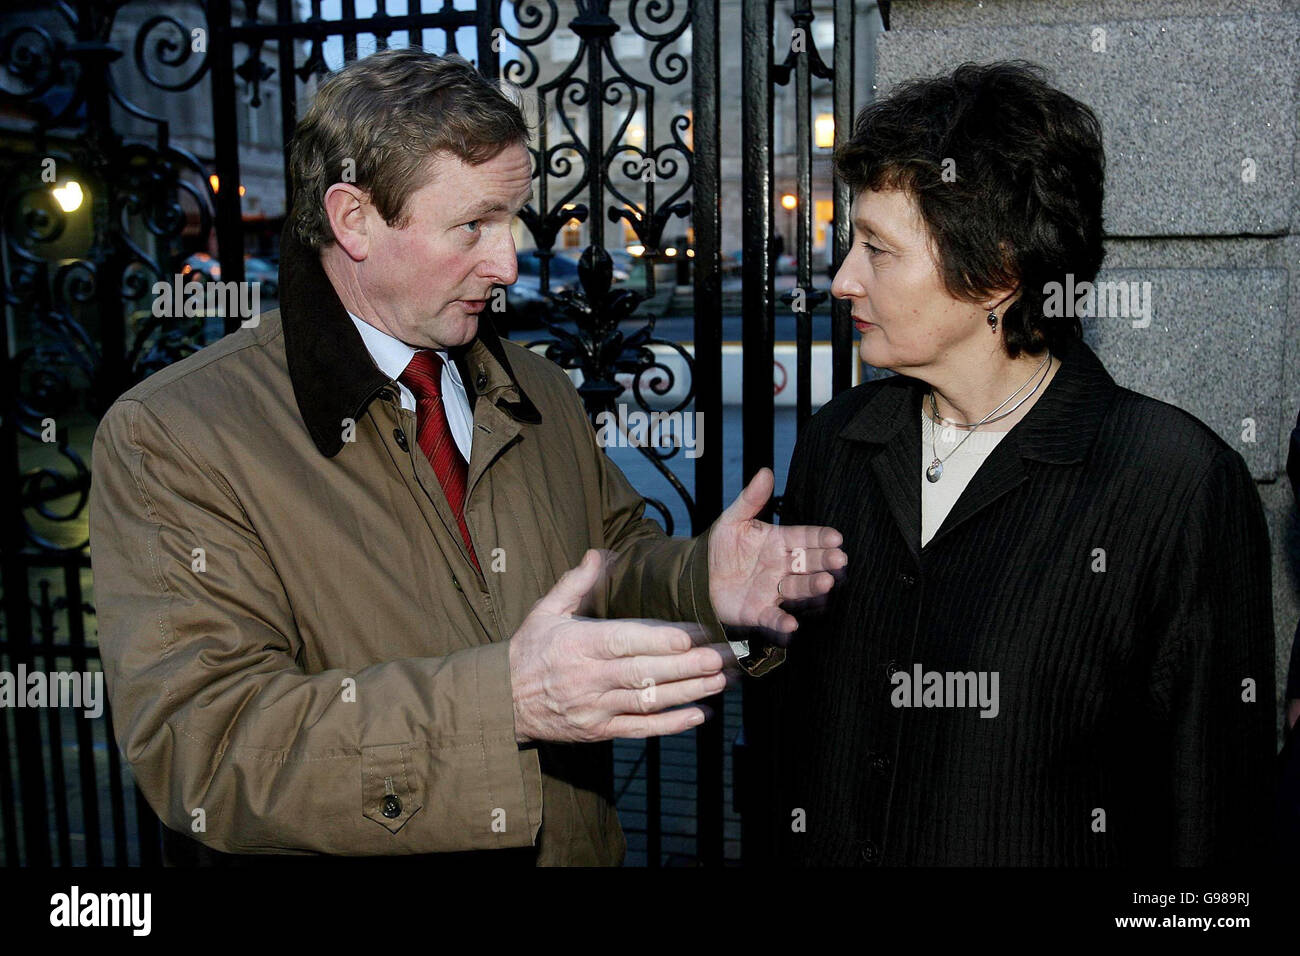 Fine Gael Leader Enda Kenny TD meets Geraldine Finucane, widow of murdered solicitor Pat Finucane, outside the Government Buildings in Dublin before they attended the joint party debate calling for an independent inquiry into the killing, Wednesday March 8, 2006. See PA story IRISH Finucane. PRESS ASSOCIATION Photo. Photo credit should read: Julien Behal / PA. Stock Photo